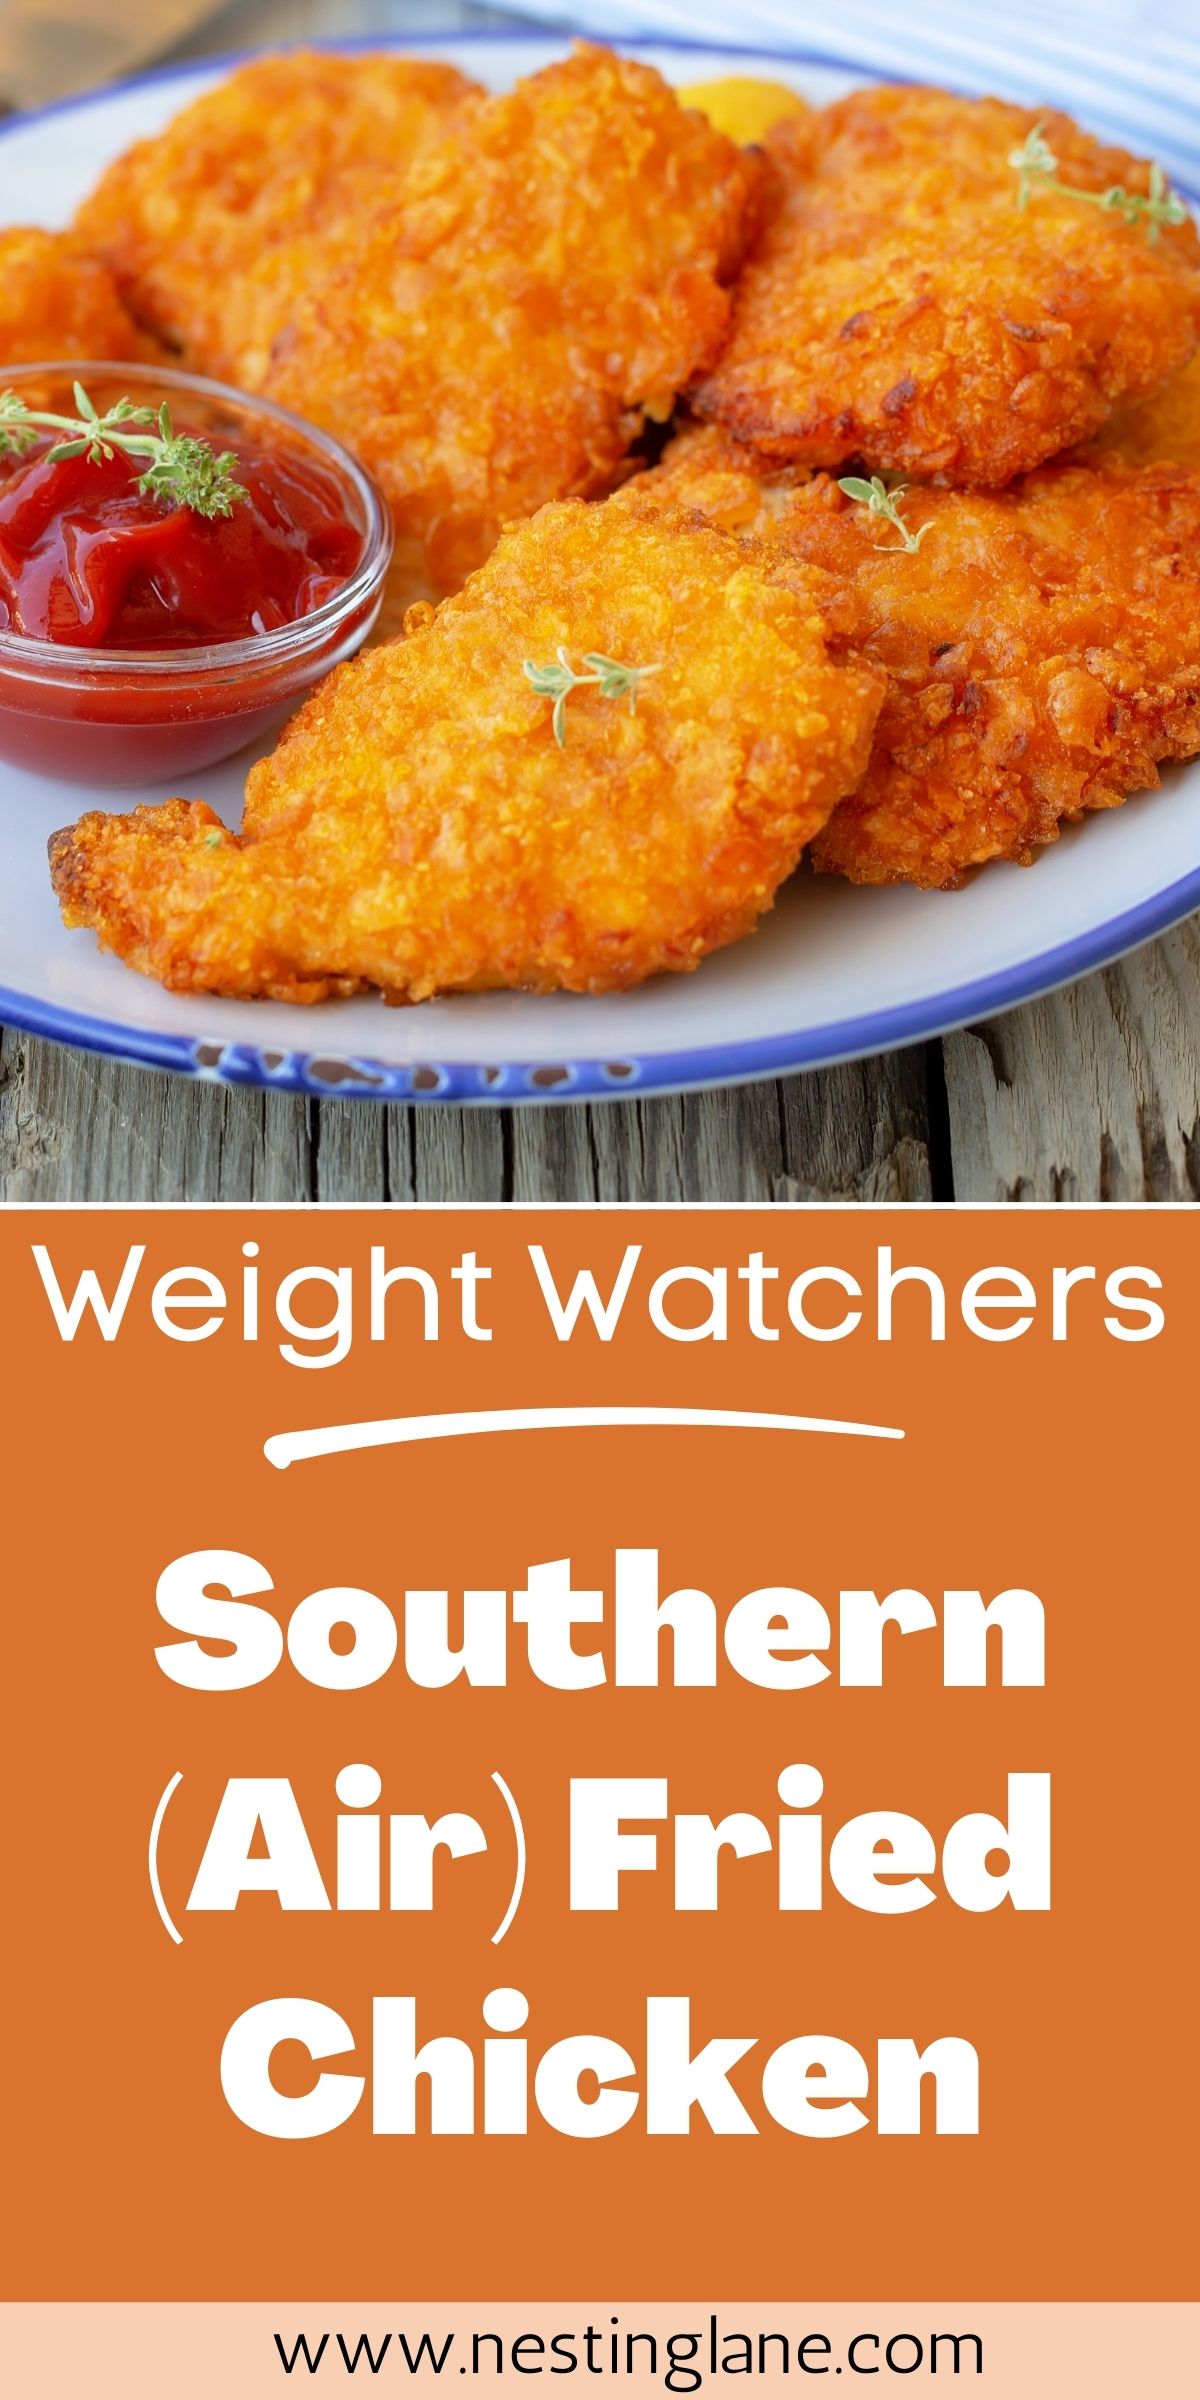 Graphic for Pinterest of Weight Watchers Southern (Air) Fried Chicken Recipe.